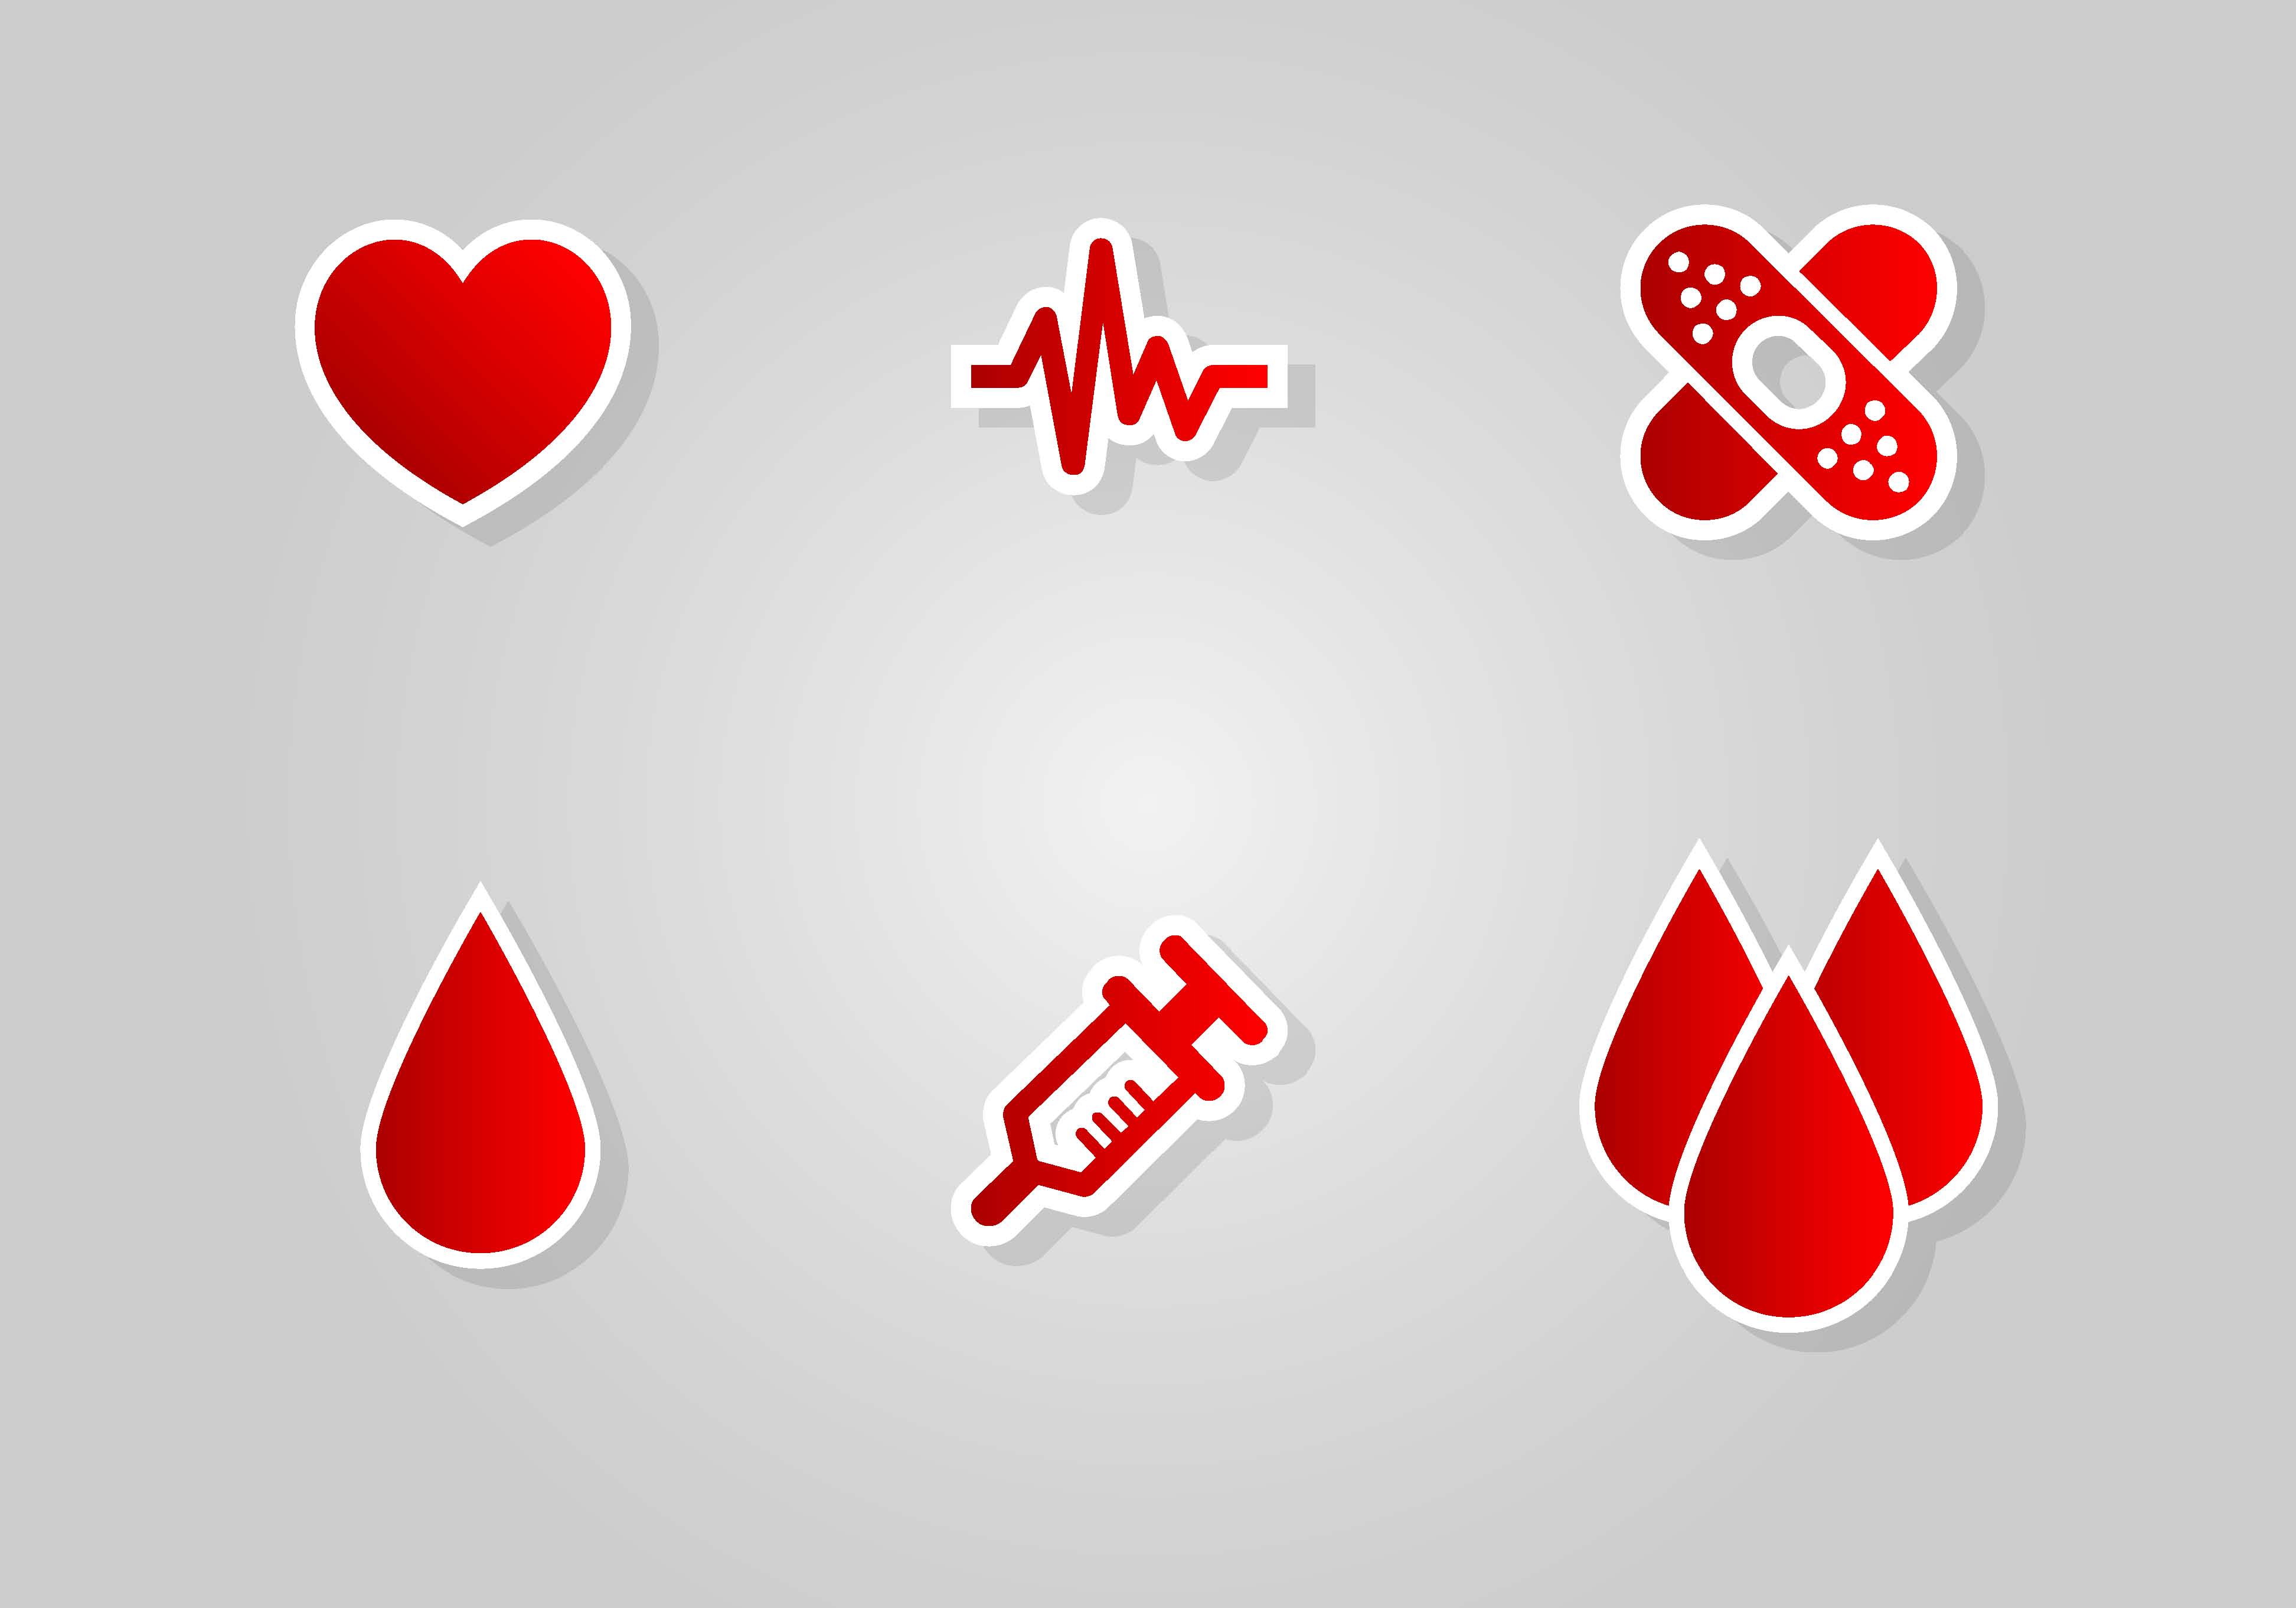 Blood Drive Vector